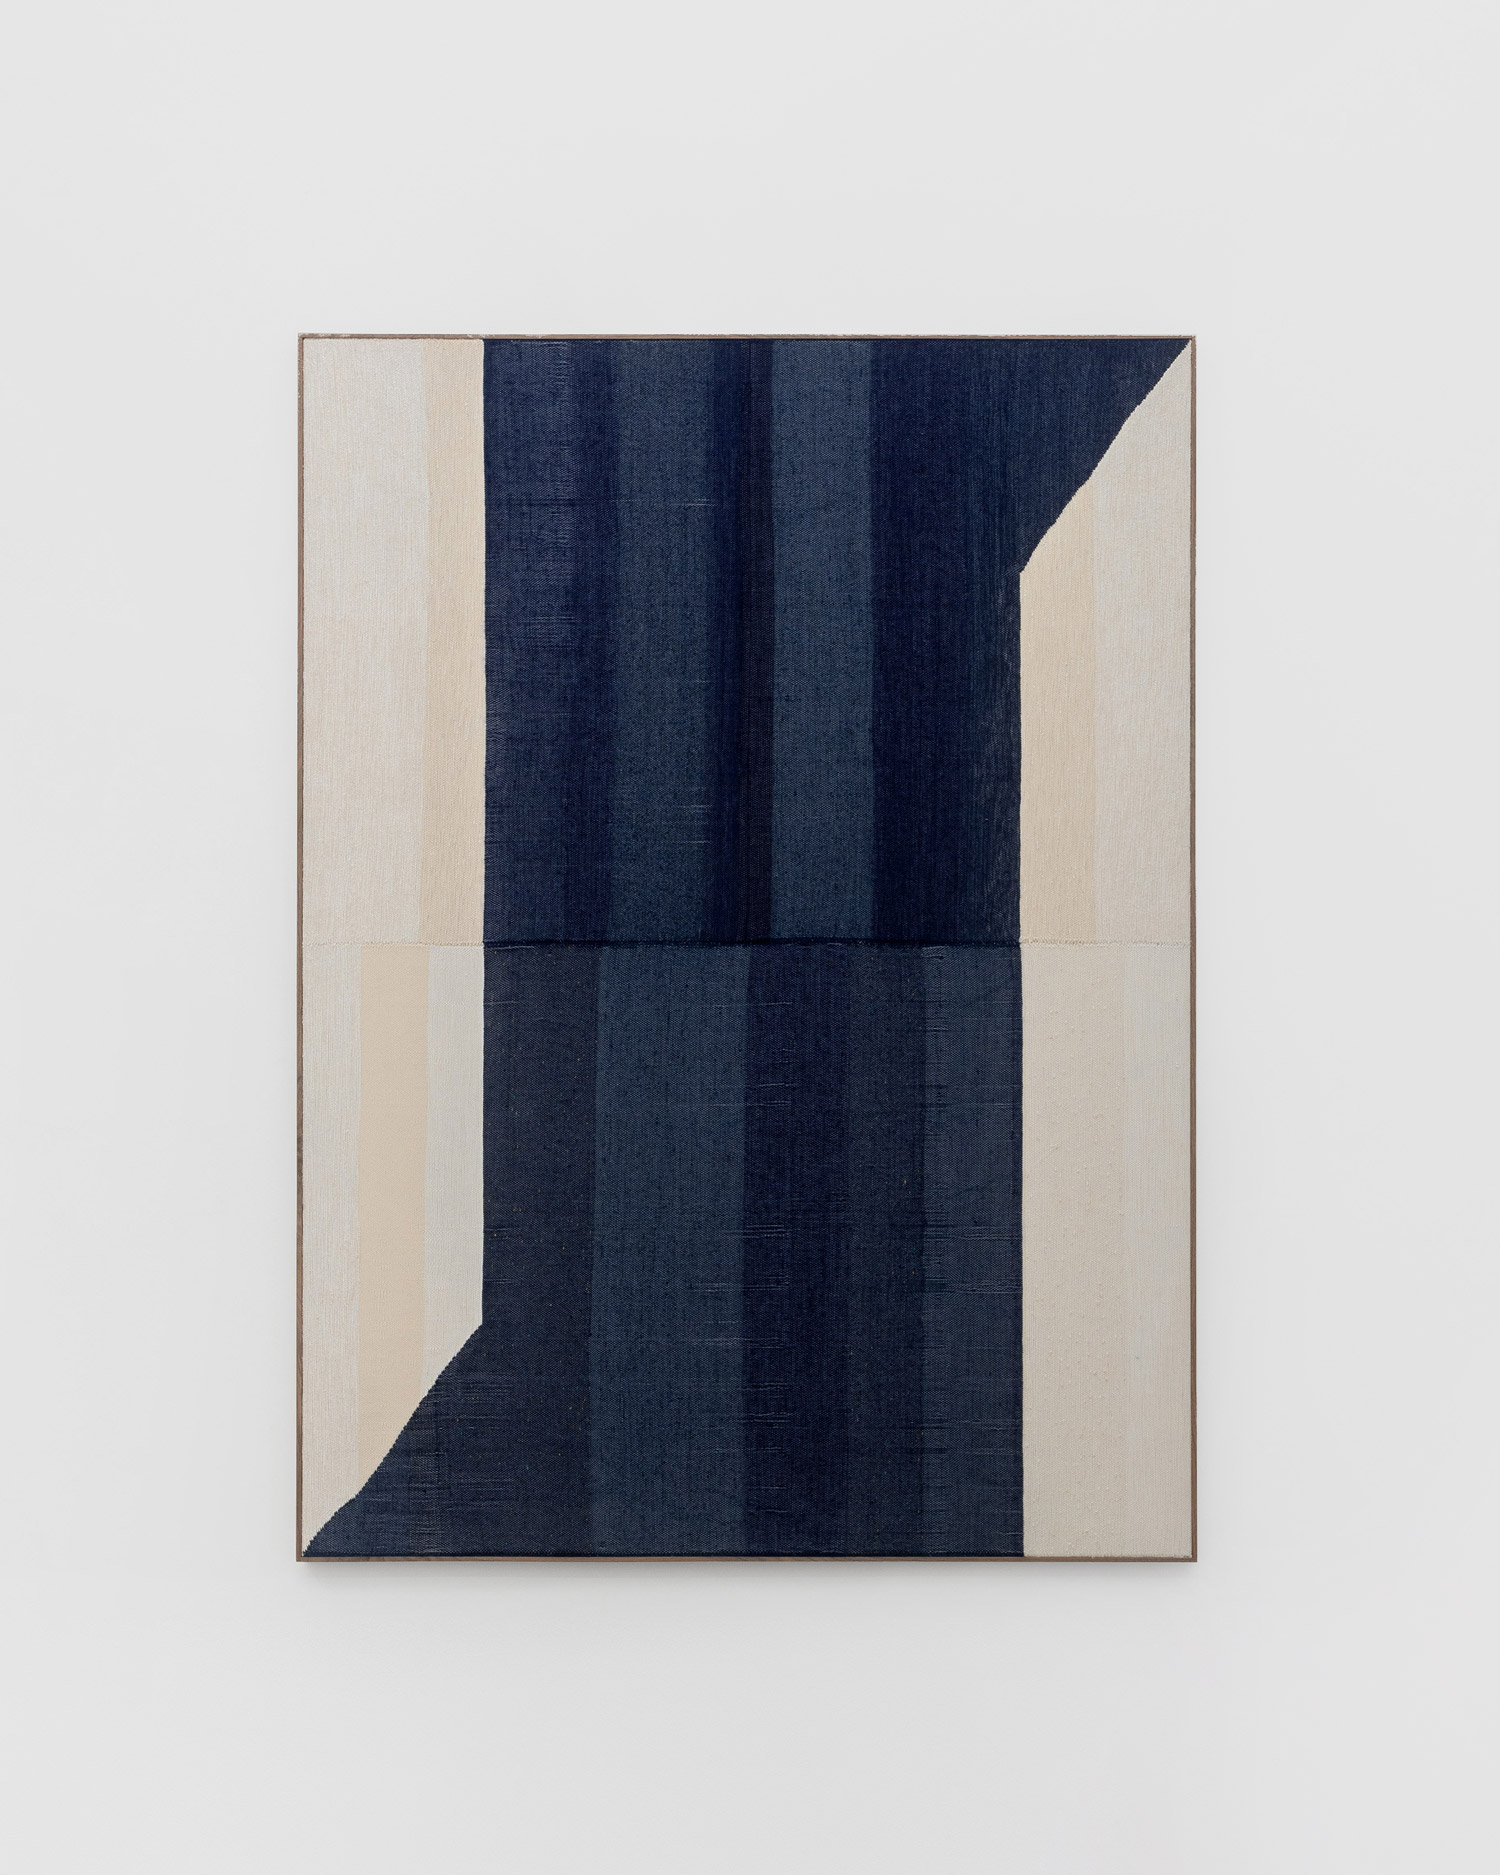 Brent Wadden, Untitled, 2021, Hand woven fibers, wool, cotton and acrylic on canvas, 222 x 162 cm © The Artist via Gallery Almine Rech